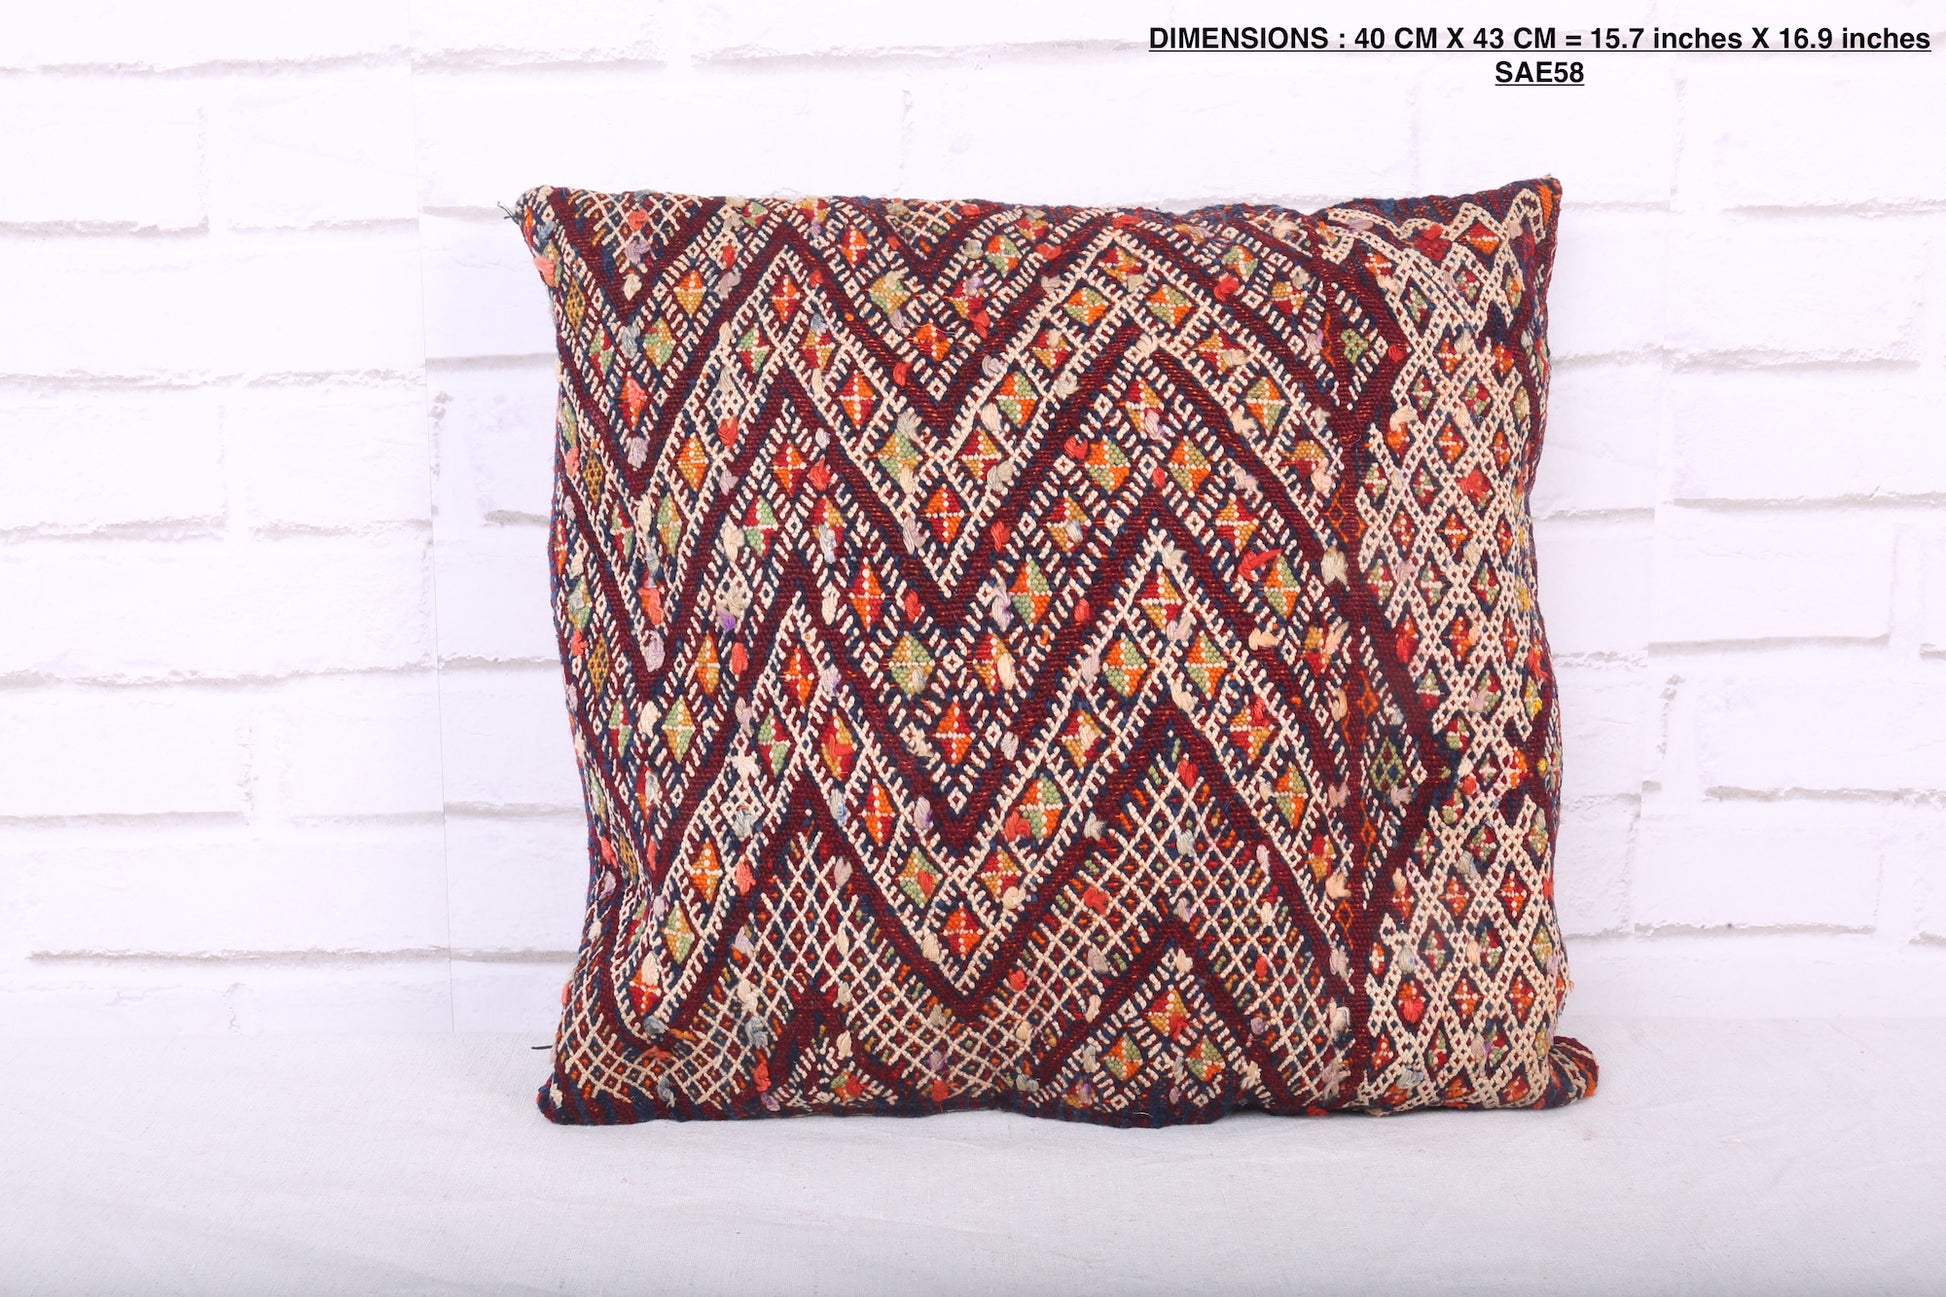 Moroccan vintage pillow 15.7 inches X 16.9 inches